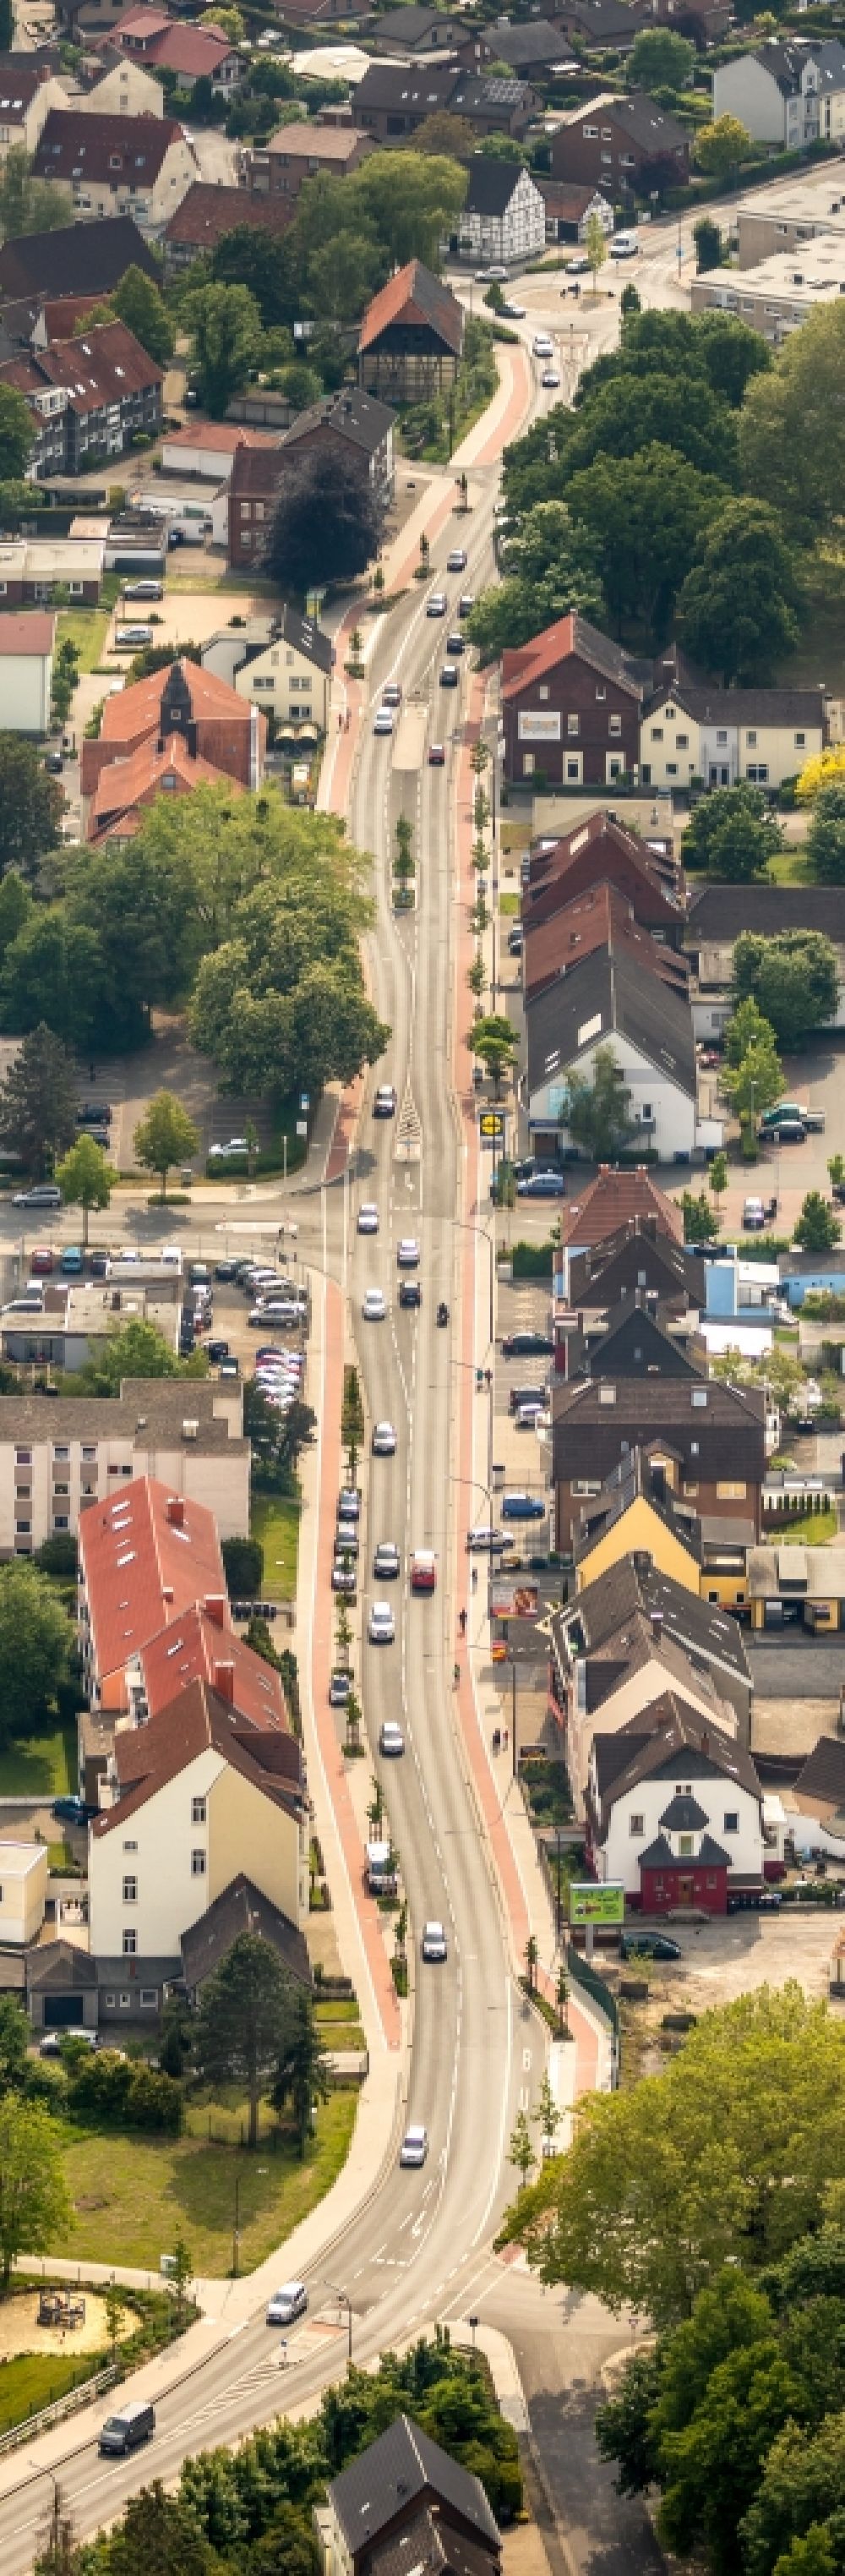 Hamm from the bird's eye view: City view on down town Kamener Strasse in Hamm in the state North Rhine-Westphalia, Germany